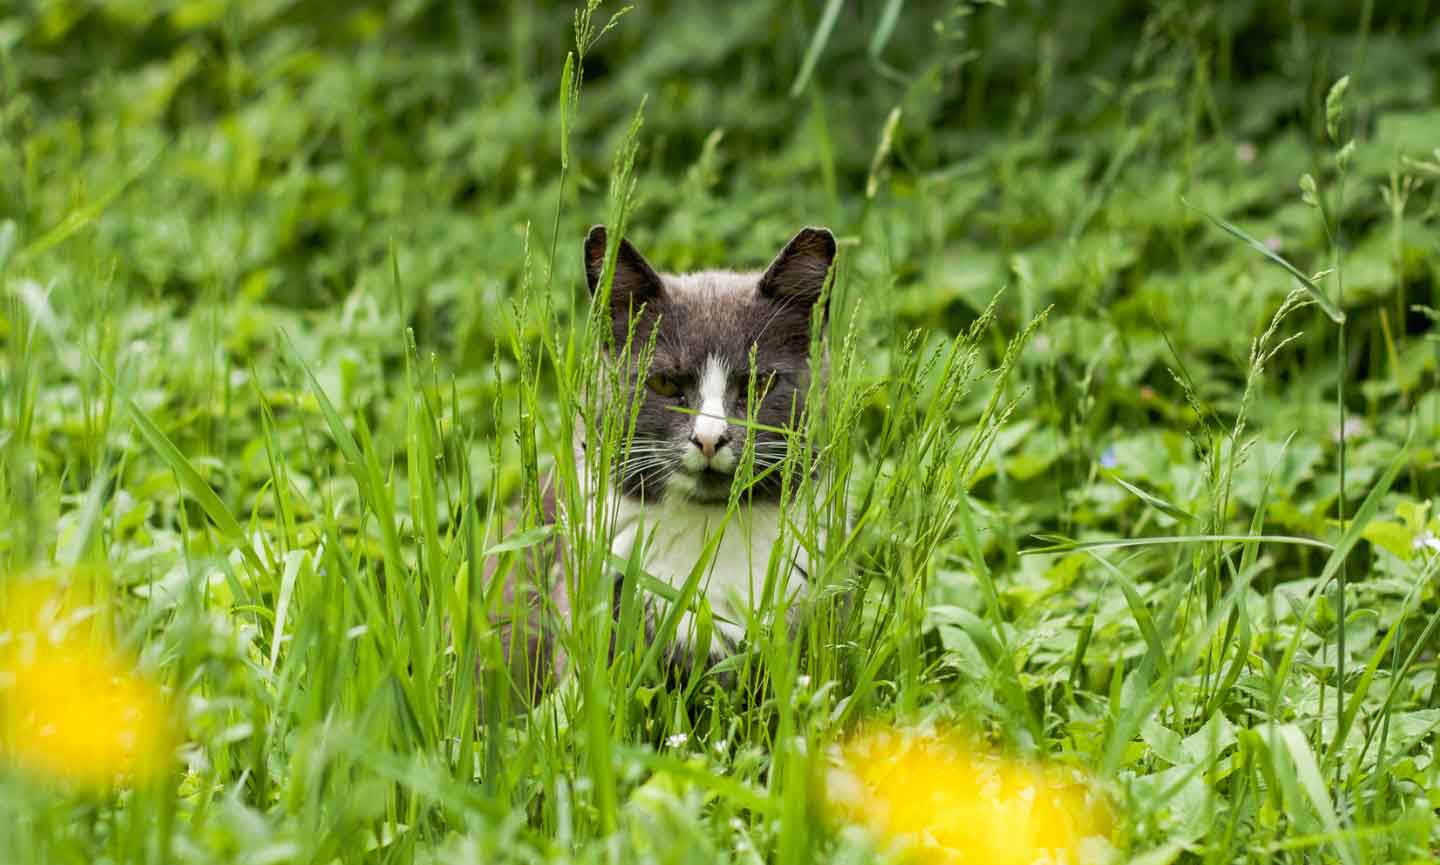 A gray cat sitting in tall grass